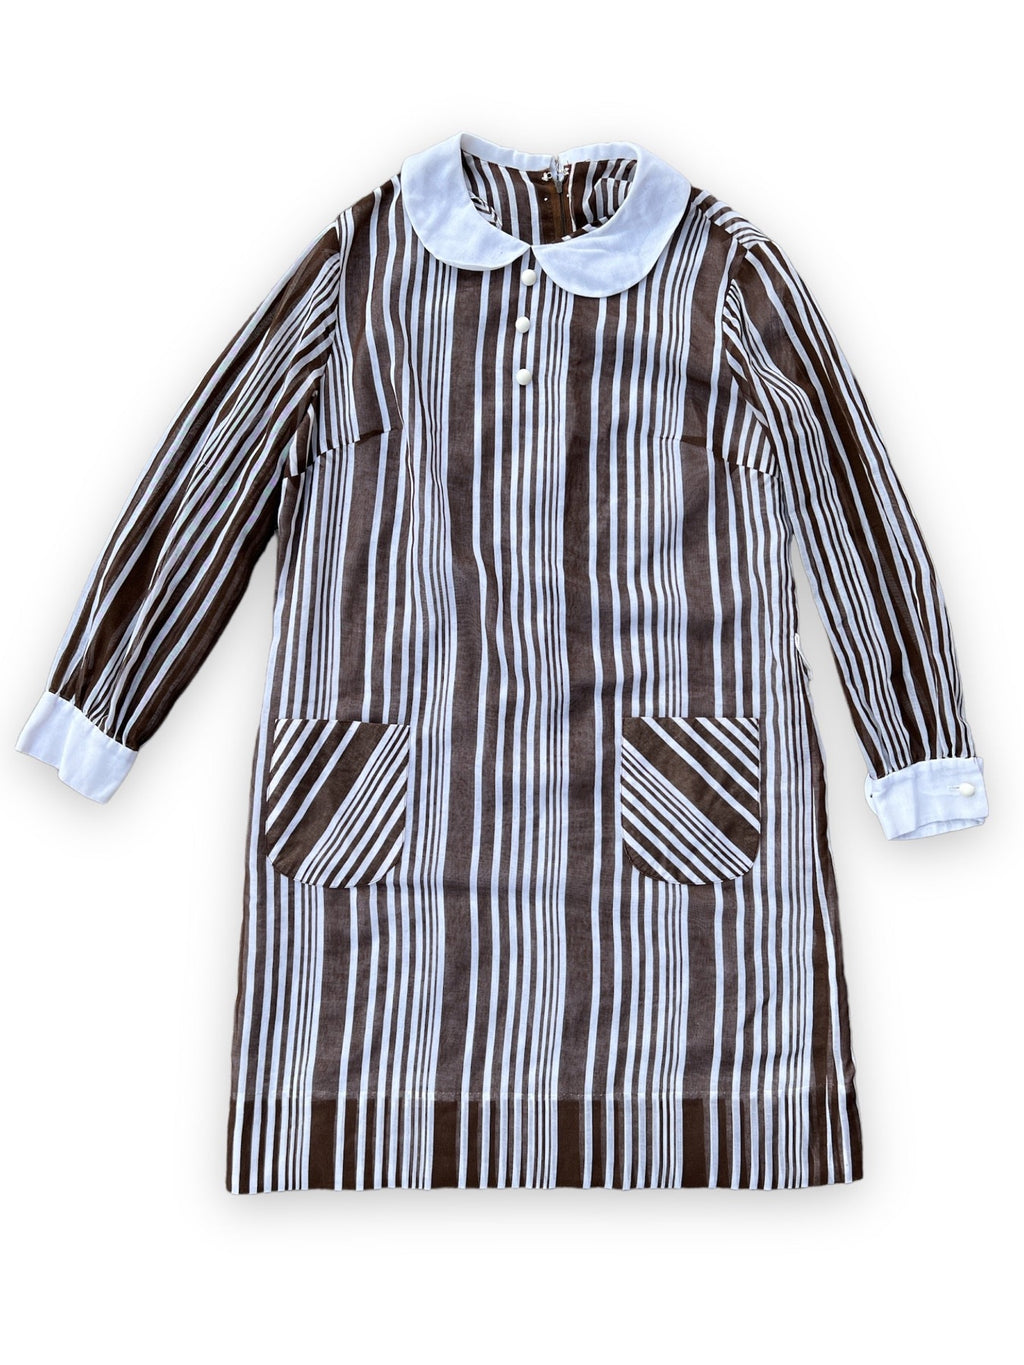 70s ROOTBEER STRIPED DRESS